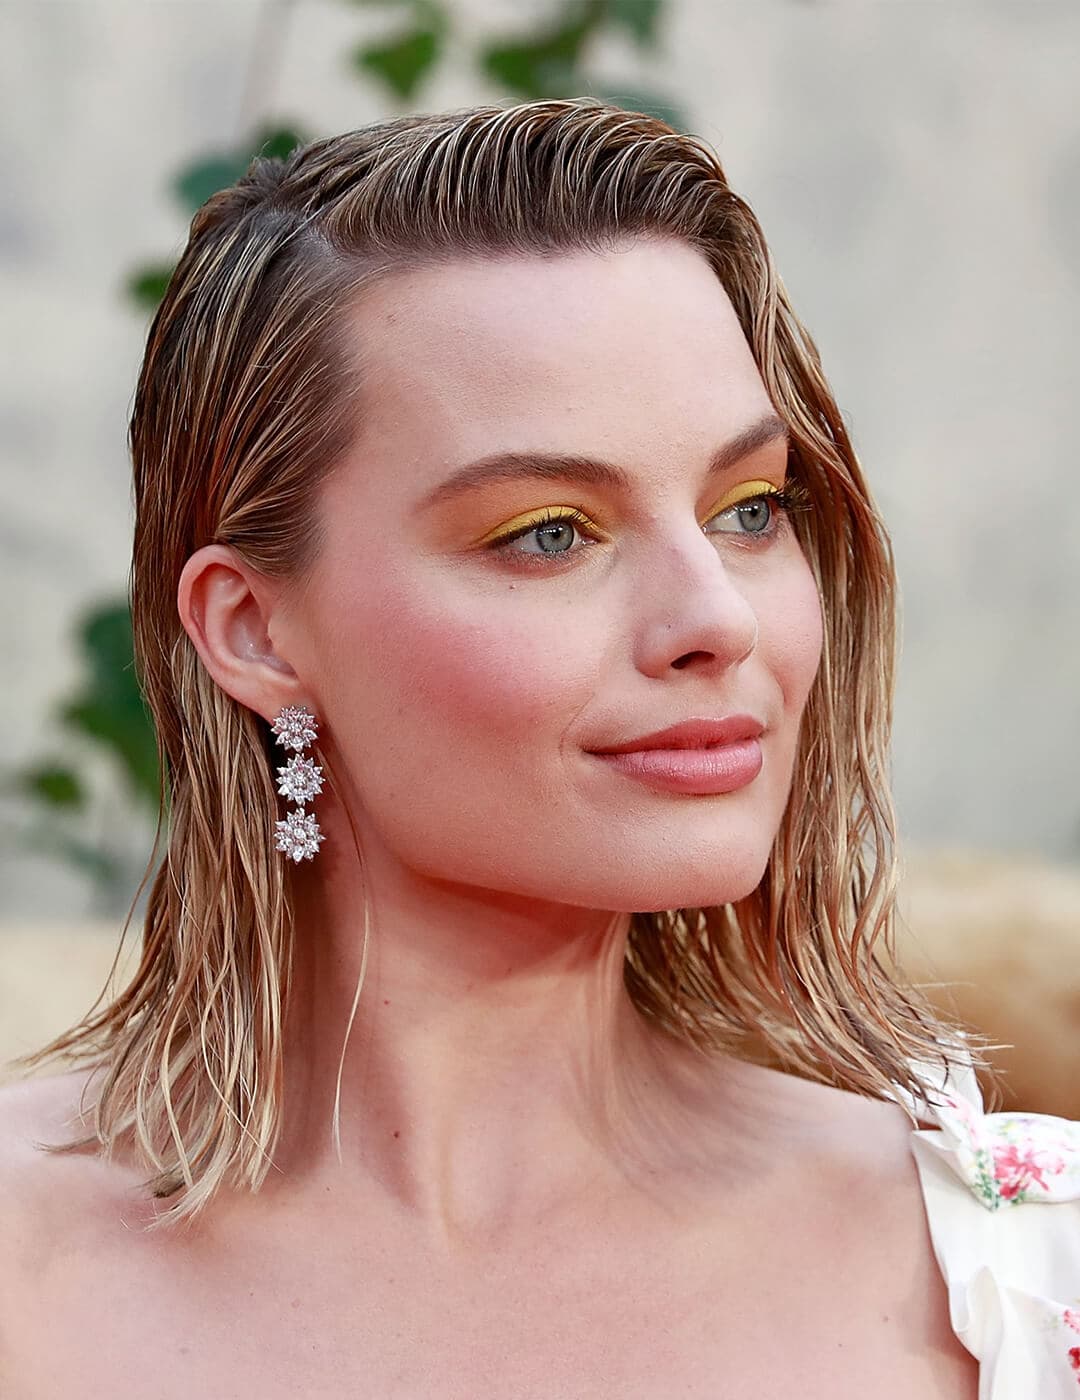 A photo of Margot Robbie with a wet look hairstyle with bright yellow eyeshadow